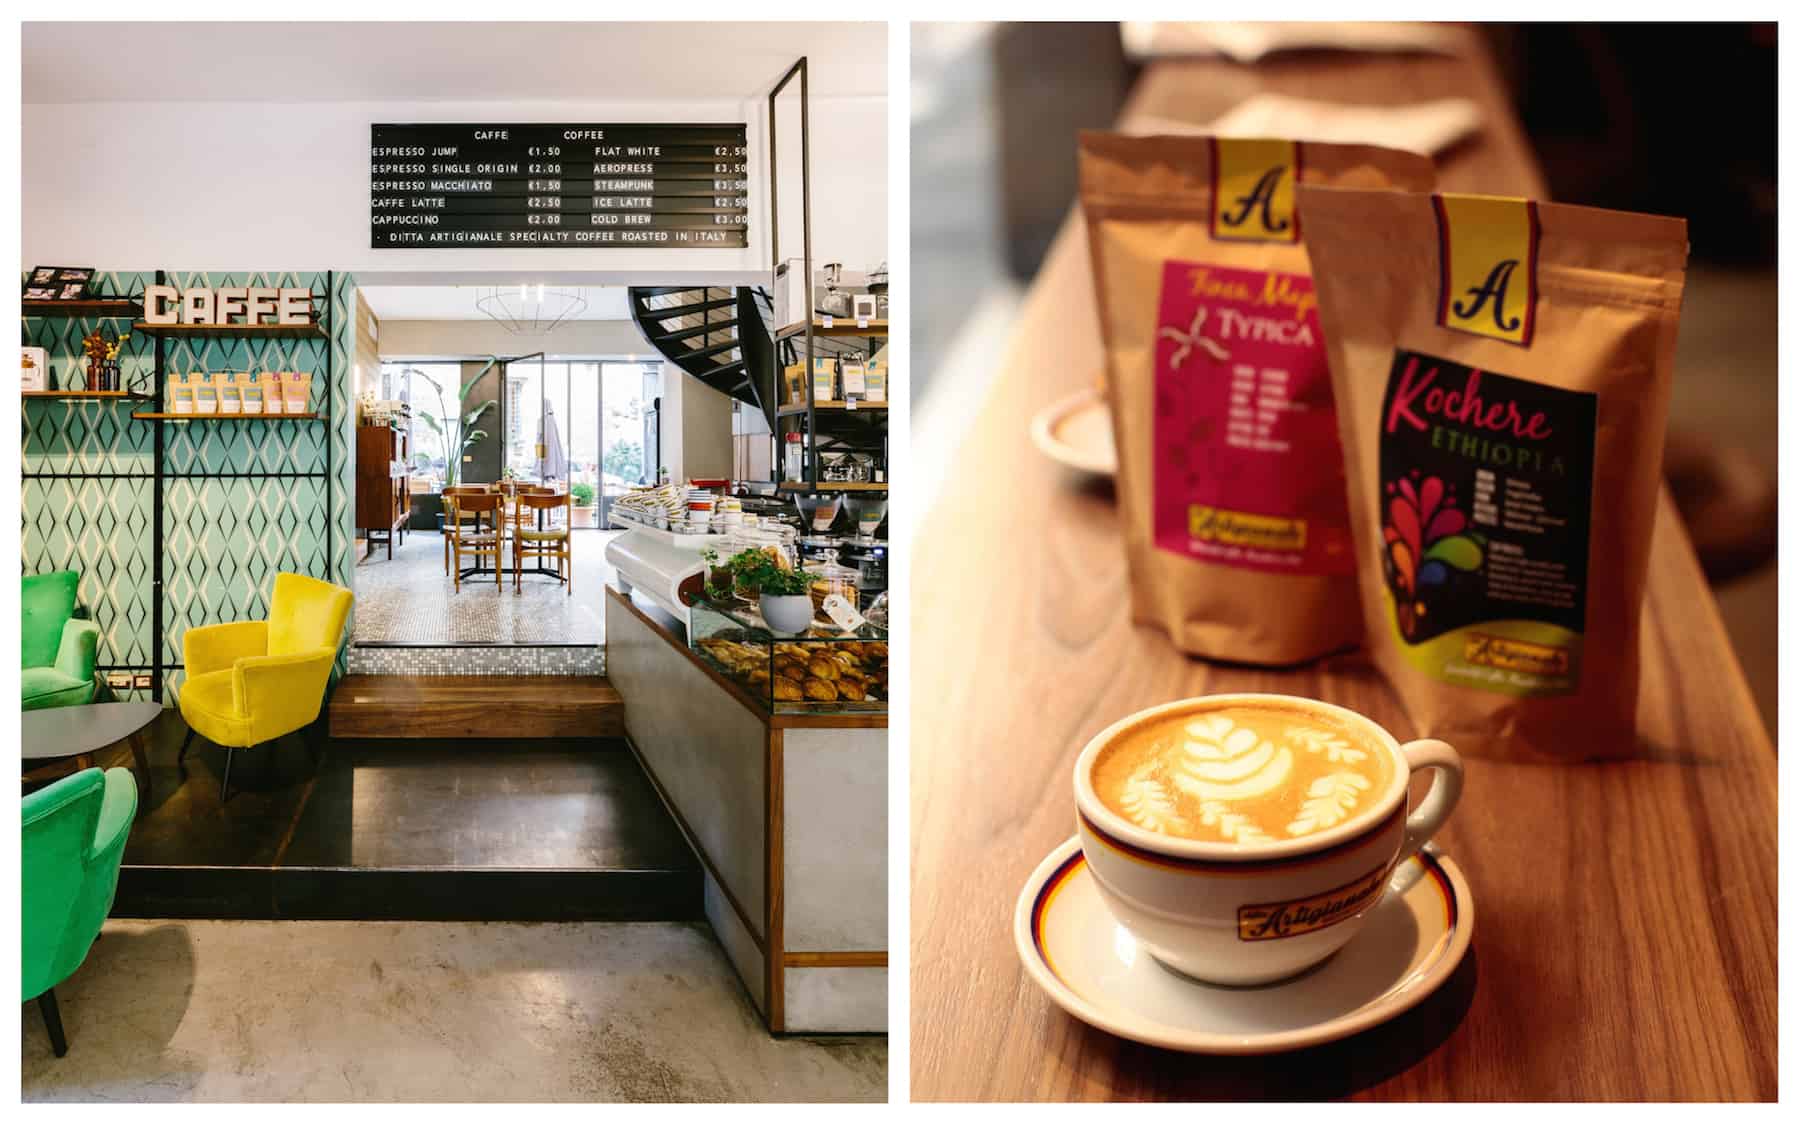 One of the best coffee shops in Florence is Ditta Artigianale for its bright interiors (left) and fresh produce including great coffee (right).